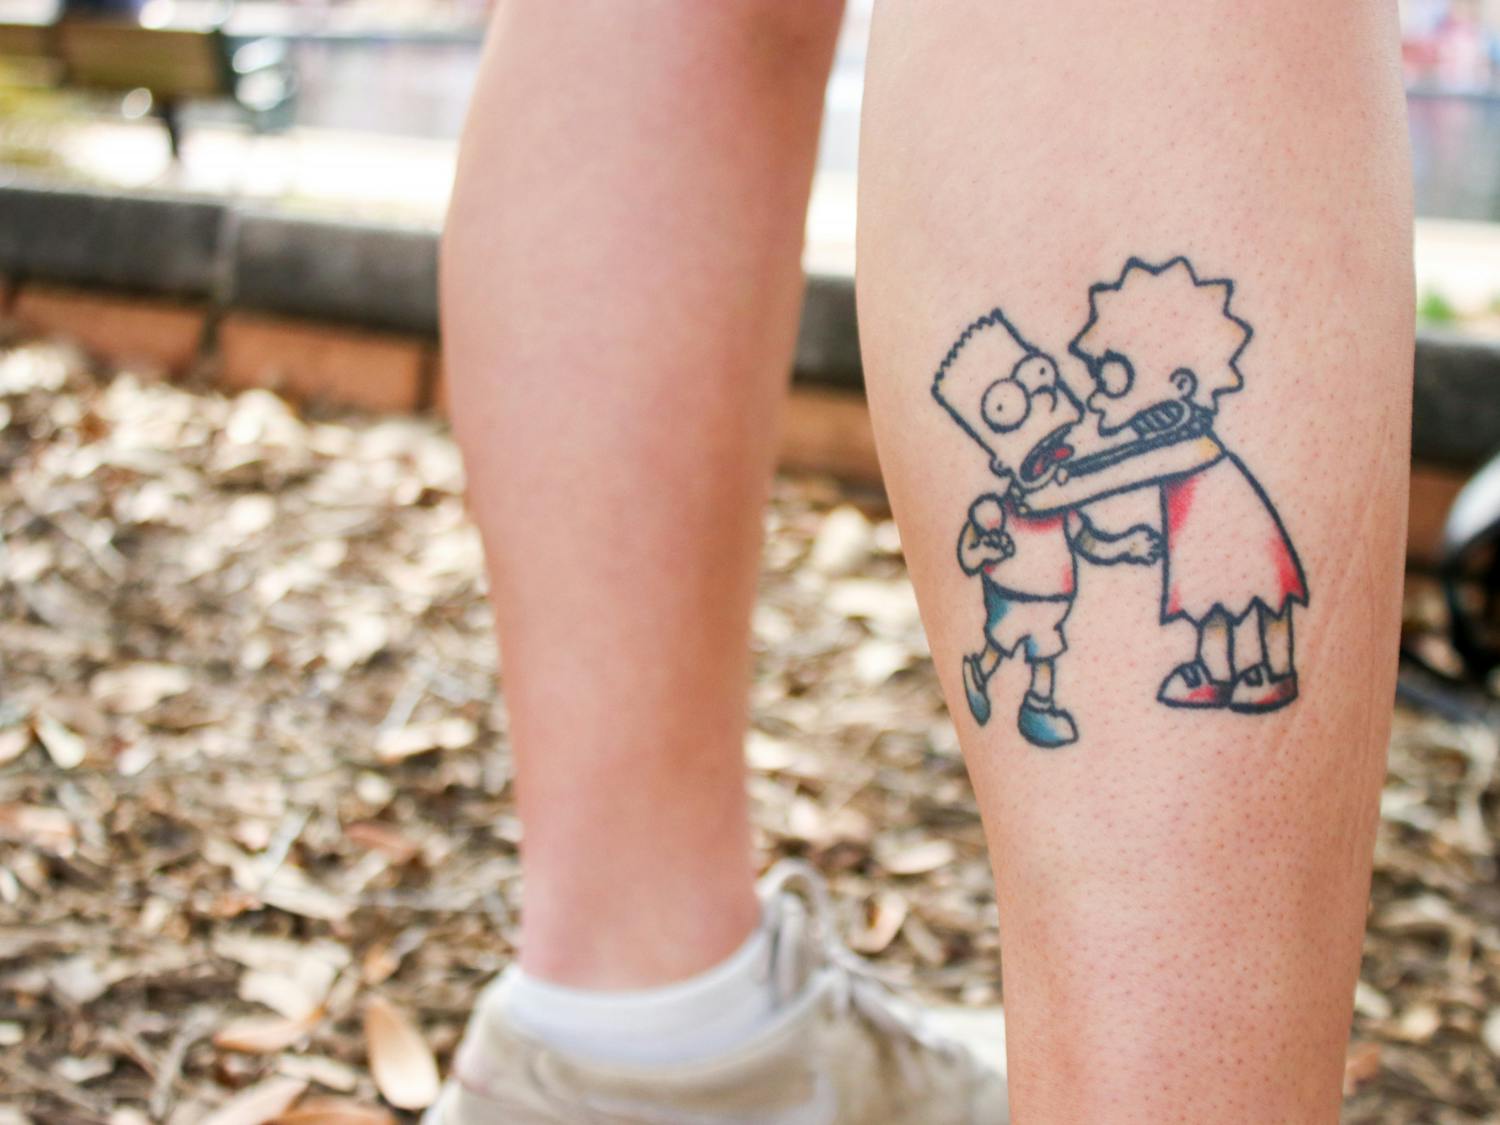 Sandford is not the only member of her family who embraces tattoo culture. Her older brother, Zach Sandford, not only has tattoos, but has a tattoo that nearly matches the image of Bart and Lisa Simpson on Sandford’s calf. The only difference is that his tattoo depicts Bart strangling Lisa. Though the tattoo veers from Sandford’s usual aesthetic, she cherishes the connection it gives her to a sibling that she sometimes struggles to connect with, being 11 years younger than him.